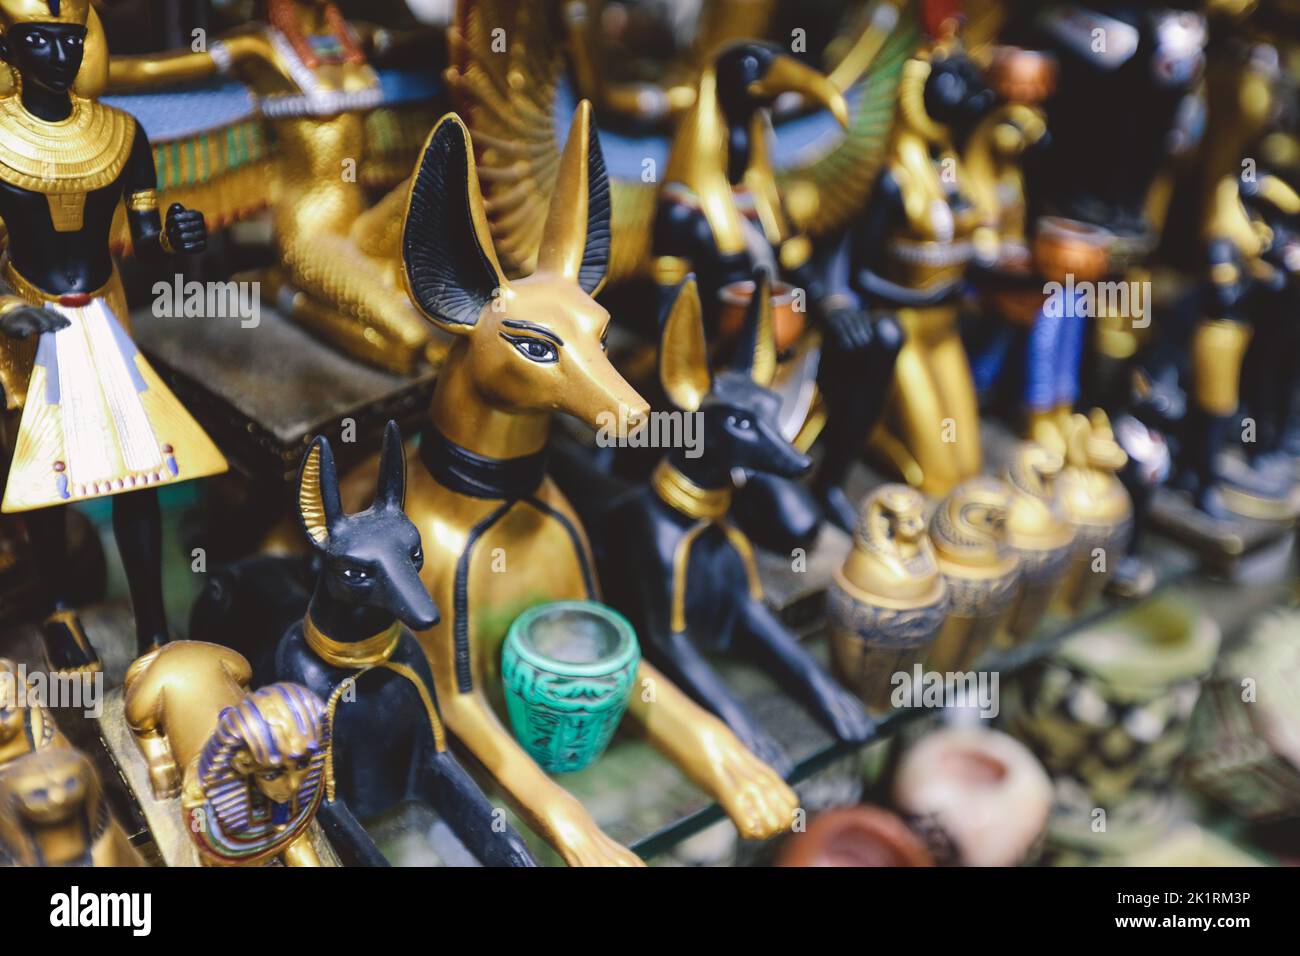 Cairo, Egypt  - November 15, 2020: Touristic Souvenirs on the Khan el-Khalili, famous bazaar and souq (or souk) in the historic center of Cairo, Egypt Stock Photo